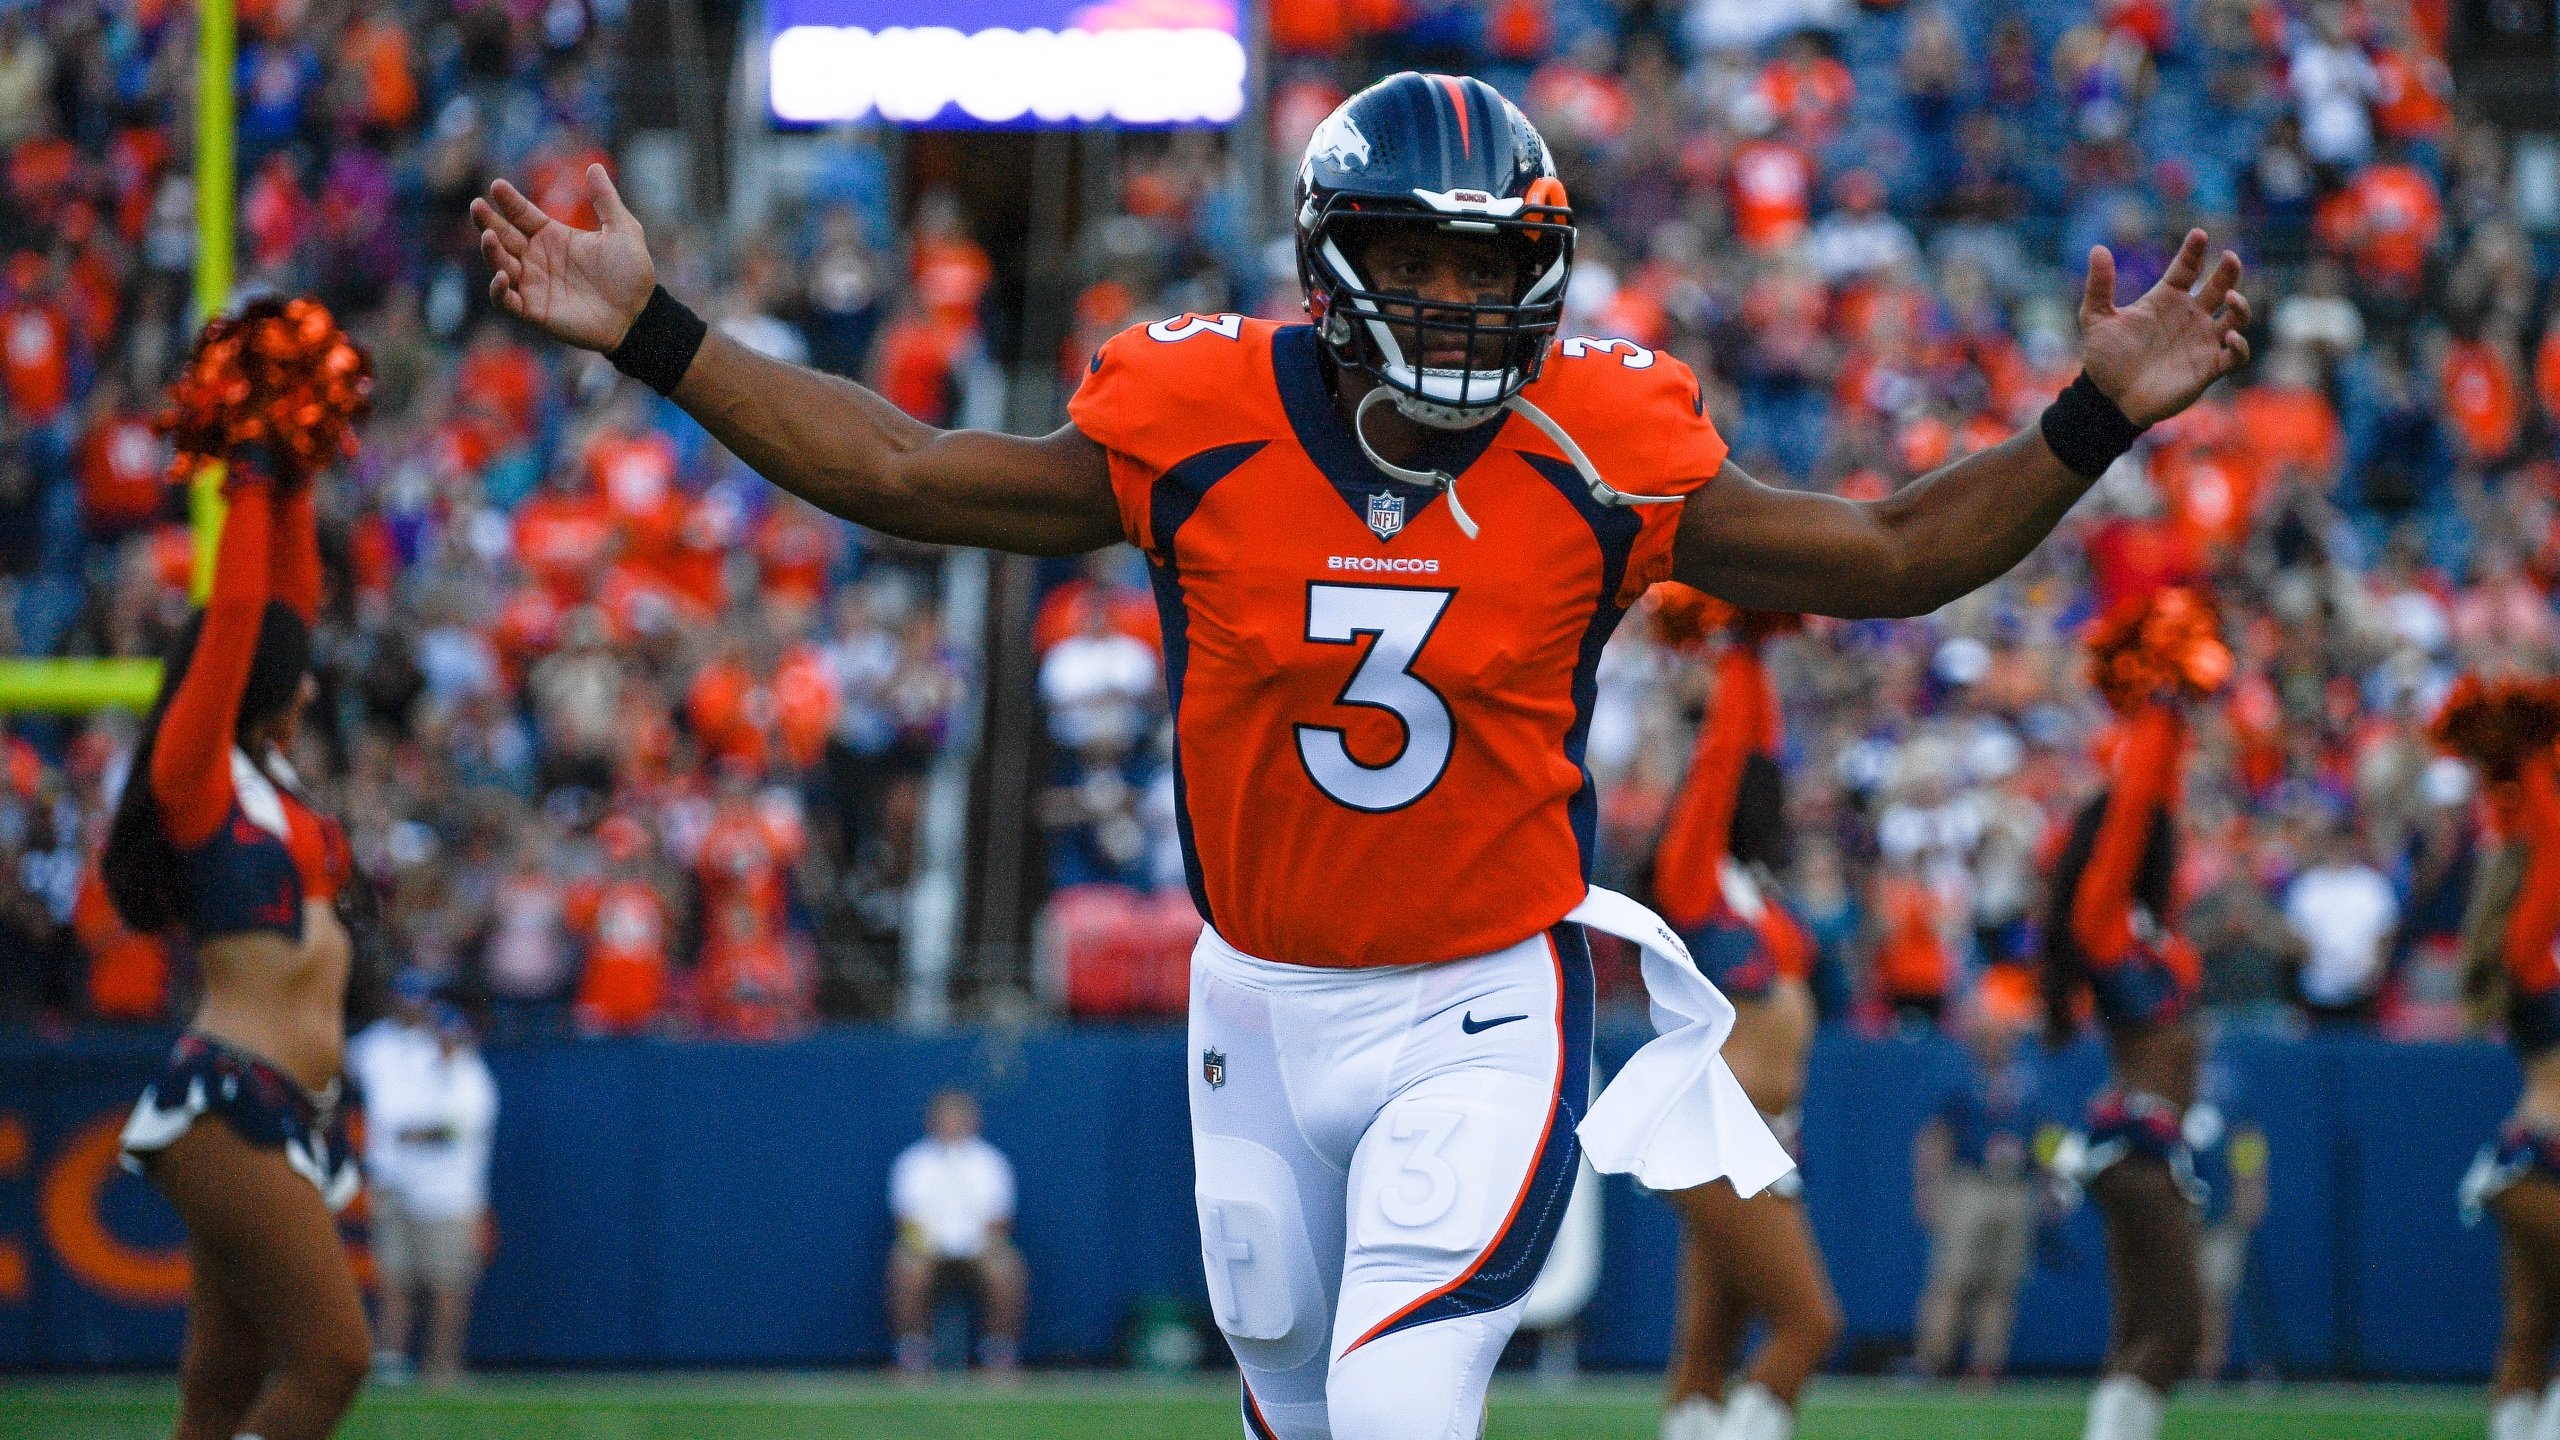 DENVER BRONCOS: Russell Wilson Gets Massive 5 Year Contract Extension Without Even Playing A Game